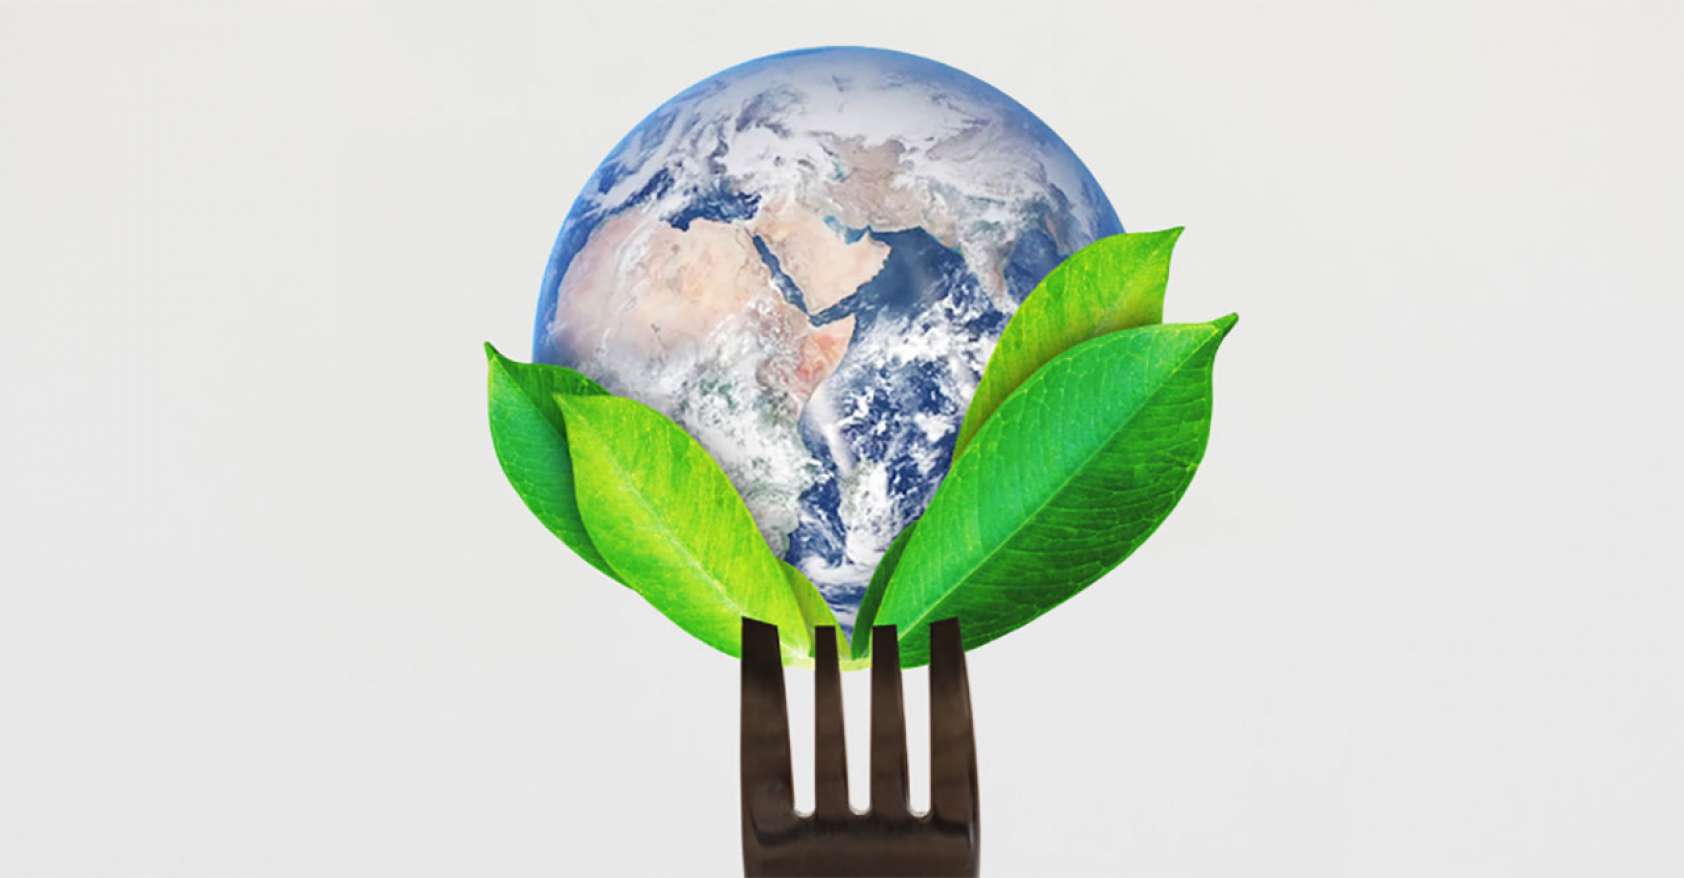 Globe on the tines of a fork with some green leaves Earth Day 2021